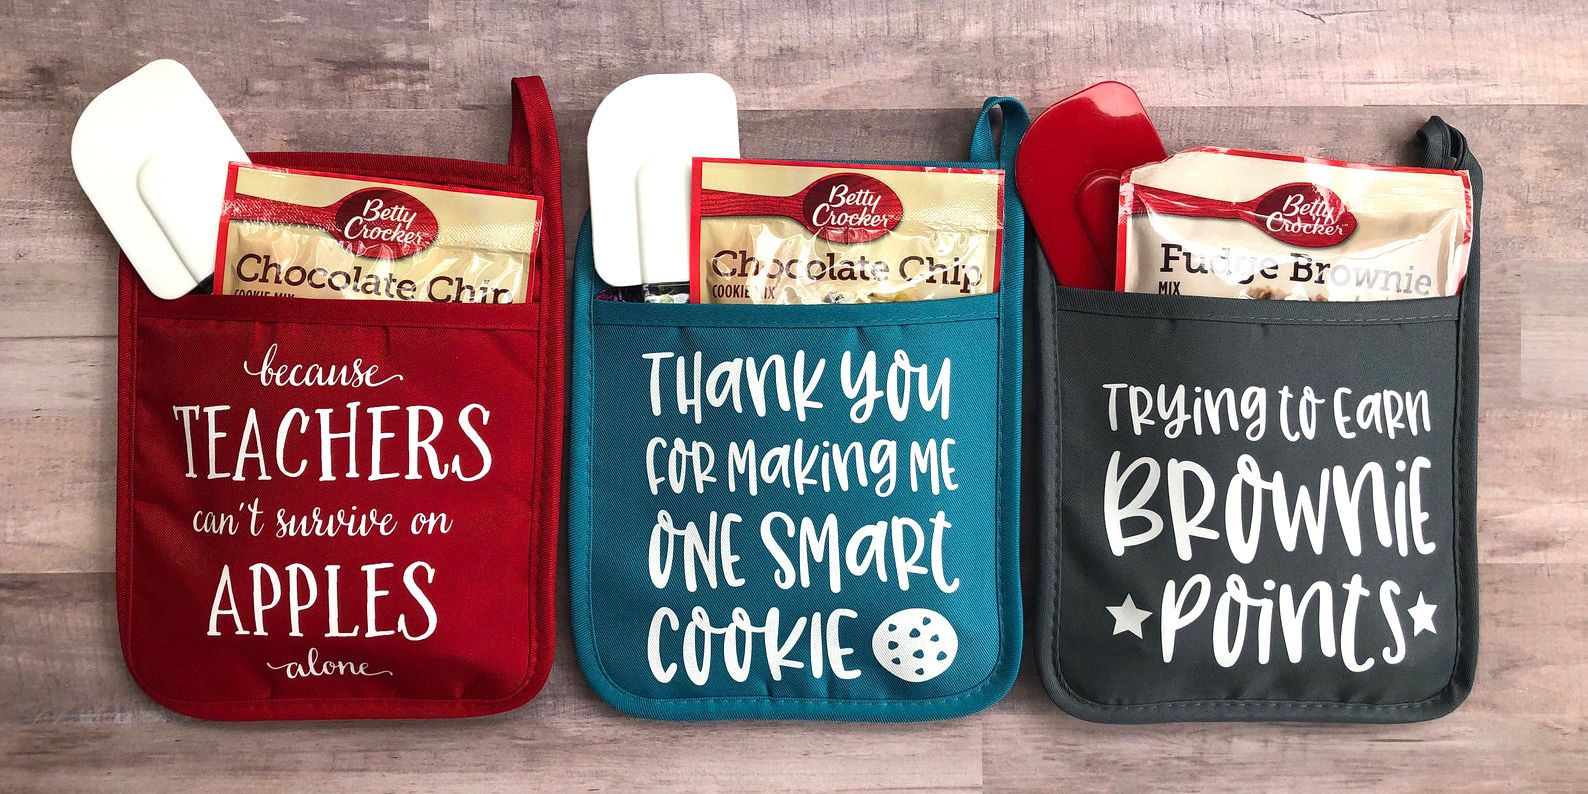 20+ Impressive Ideas For Teacher's Day Gifts To Thank Your Mentor -  CakenGifts.in